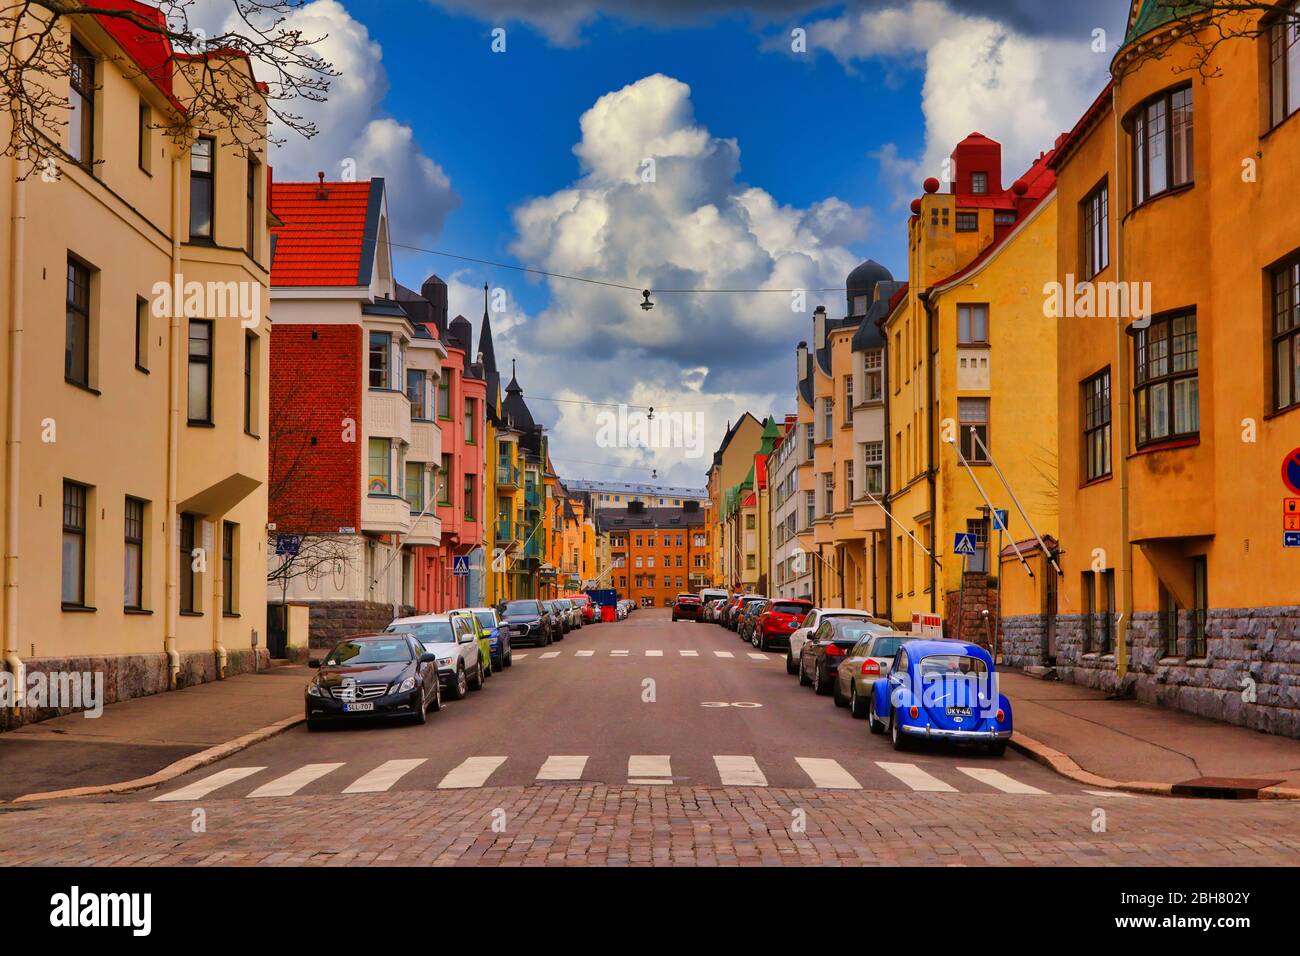 Colourful Jugendstil and Art Nouveau architecture or town villas in Huvilakatu Street, Helsinki Finland with blue sky and clouds. April 24, 2020. Stock Photo